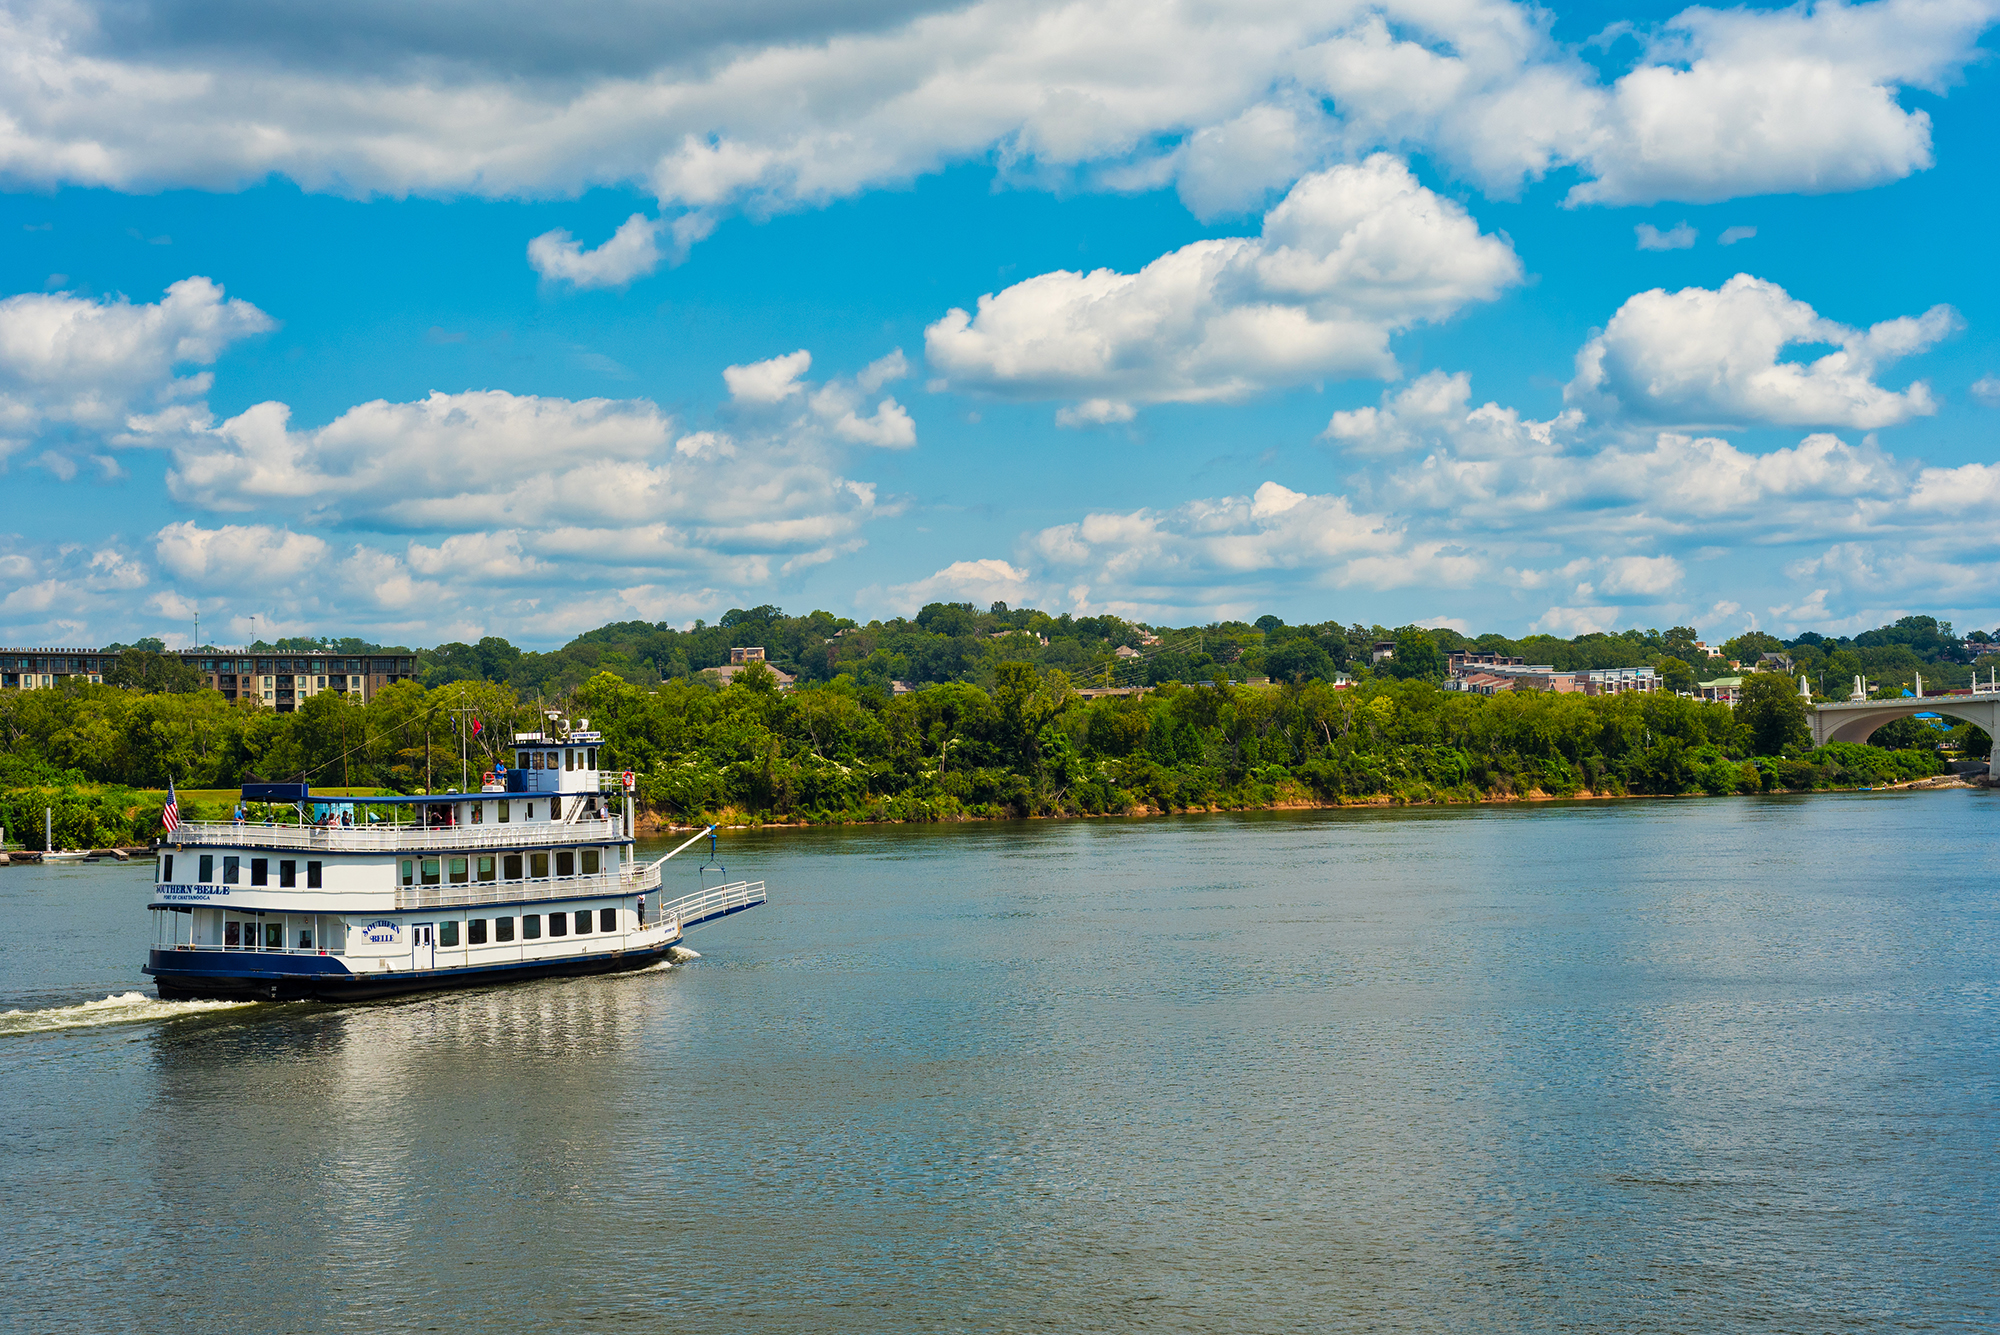 CHATTANOOGA, TN --AUGUST 23, 2017: The Southern Belle, an old-time riverboat, is popular for sightseeing excursions up and down the Tennessee River.